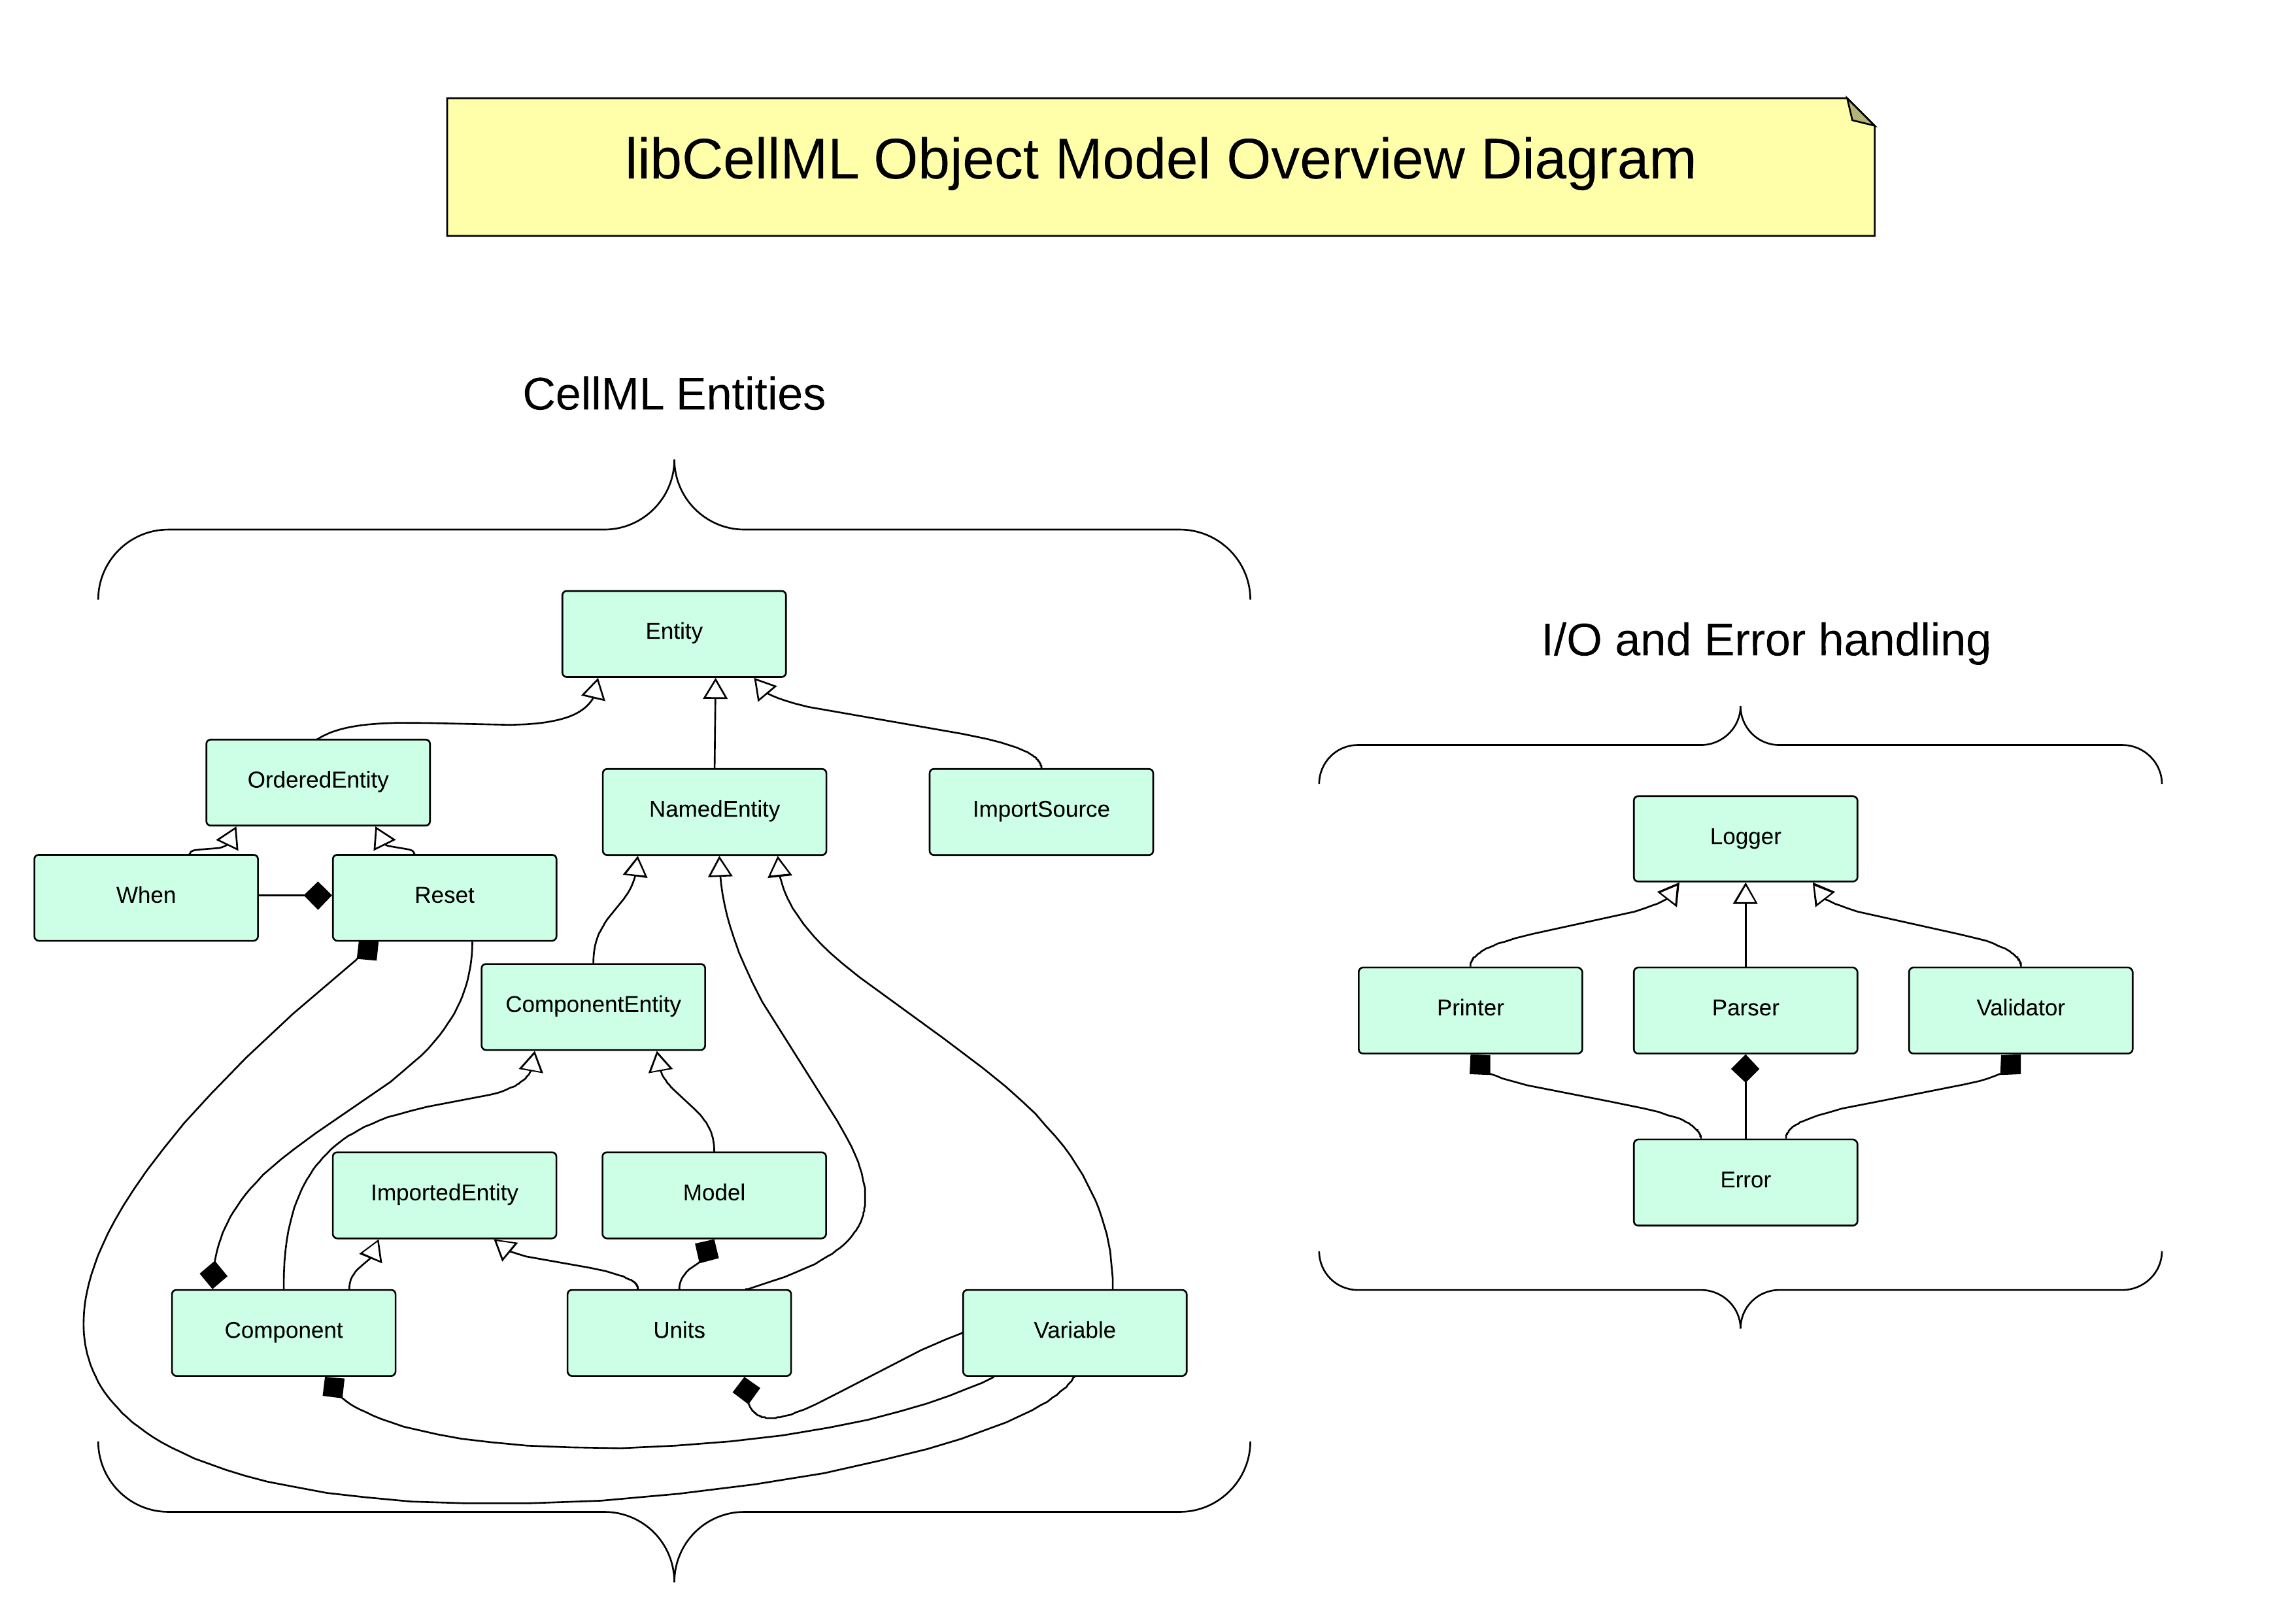 libCellML Overview Object Model.